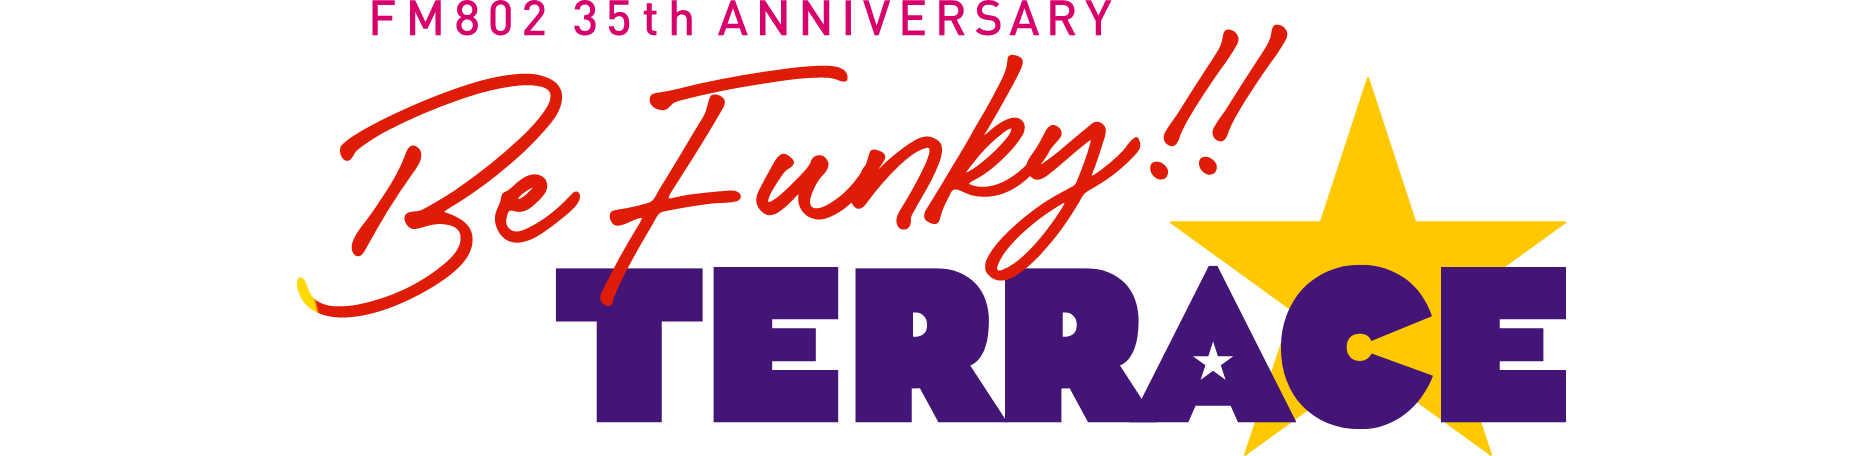 FM802 35th ANNIVERSARY Be FUNKY!! TERRACE